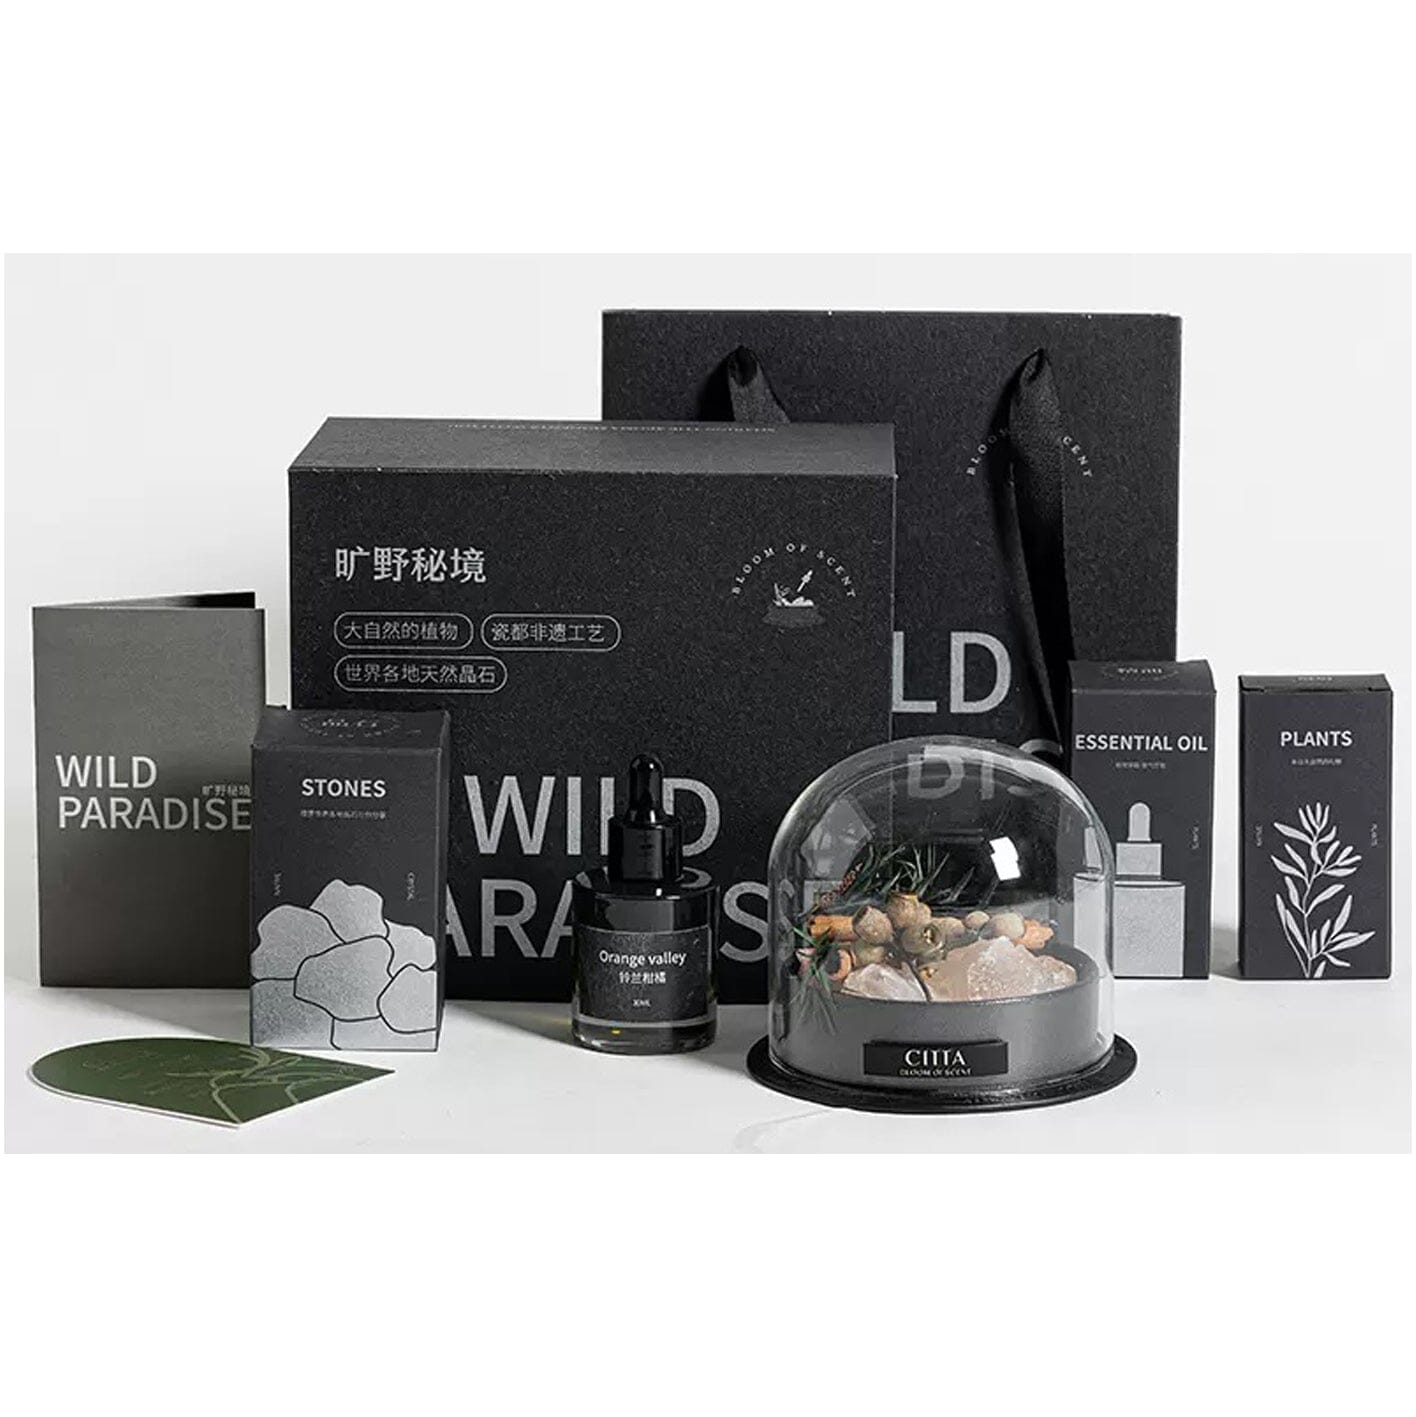 CITTA Wild Paradise Crystal Stone Diffuser Aromatherapy Gift Set with Dried Plants and High Purity Premium Essential Oil CITTA Himalayan Salt 